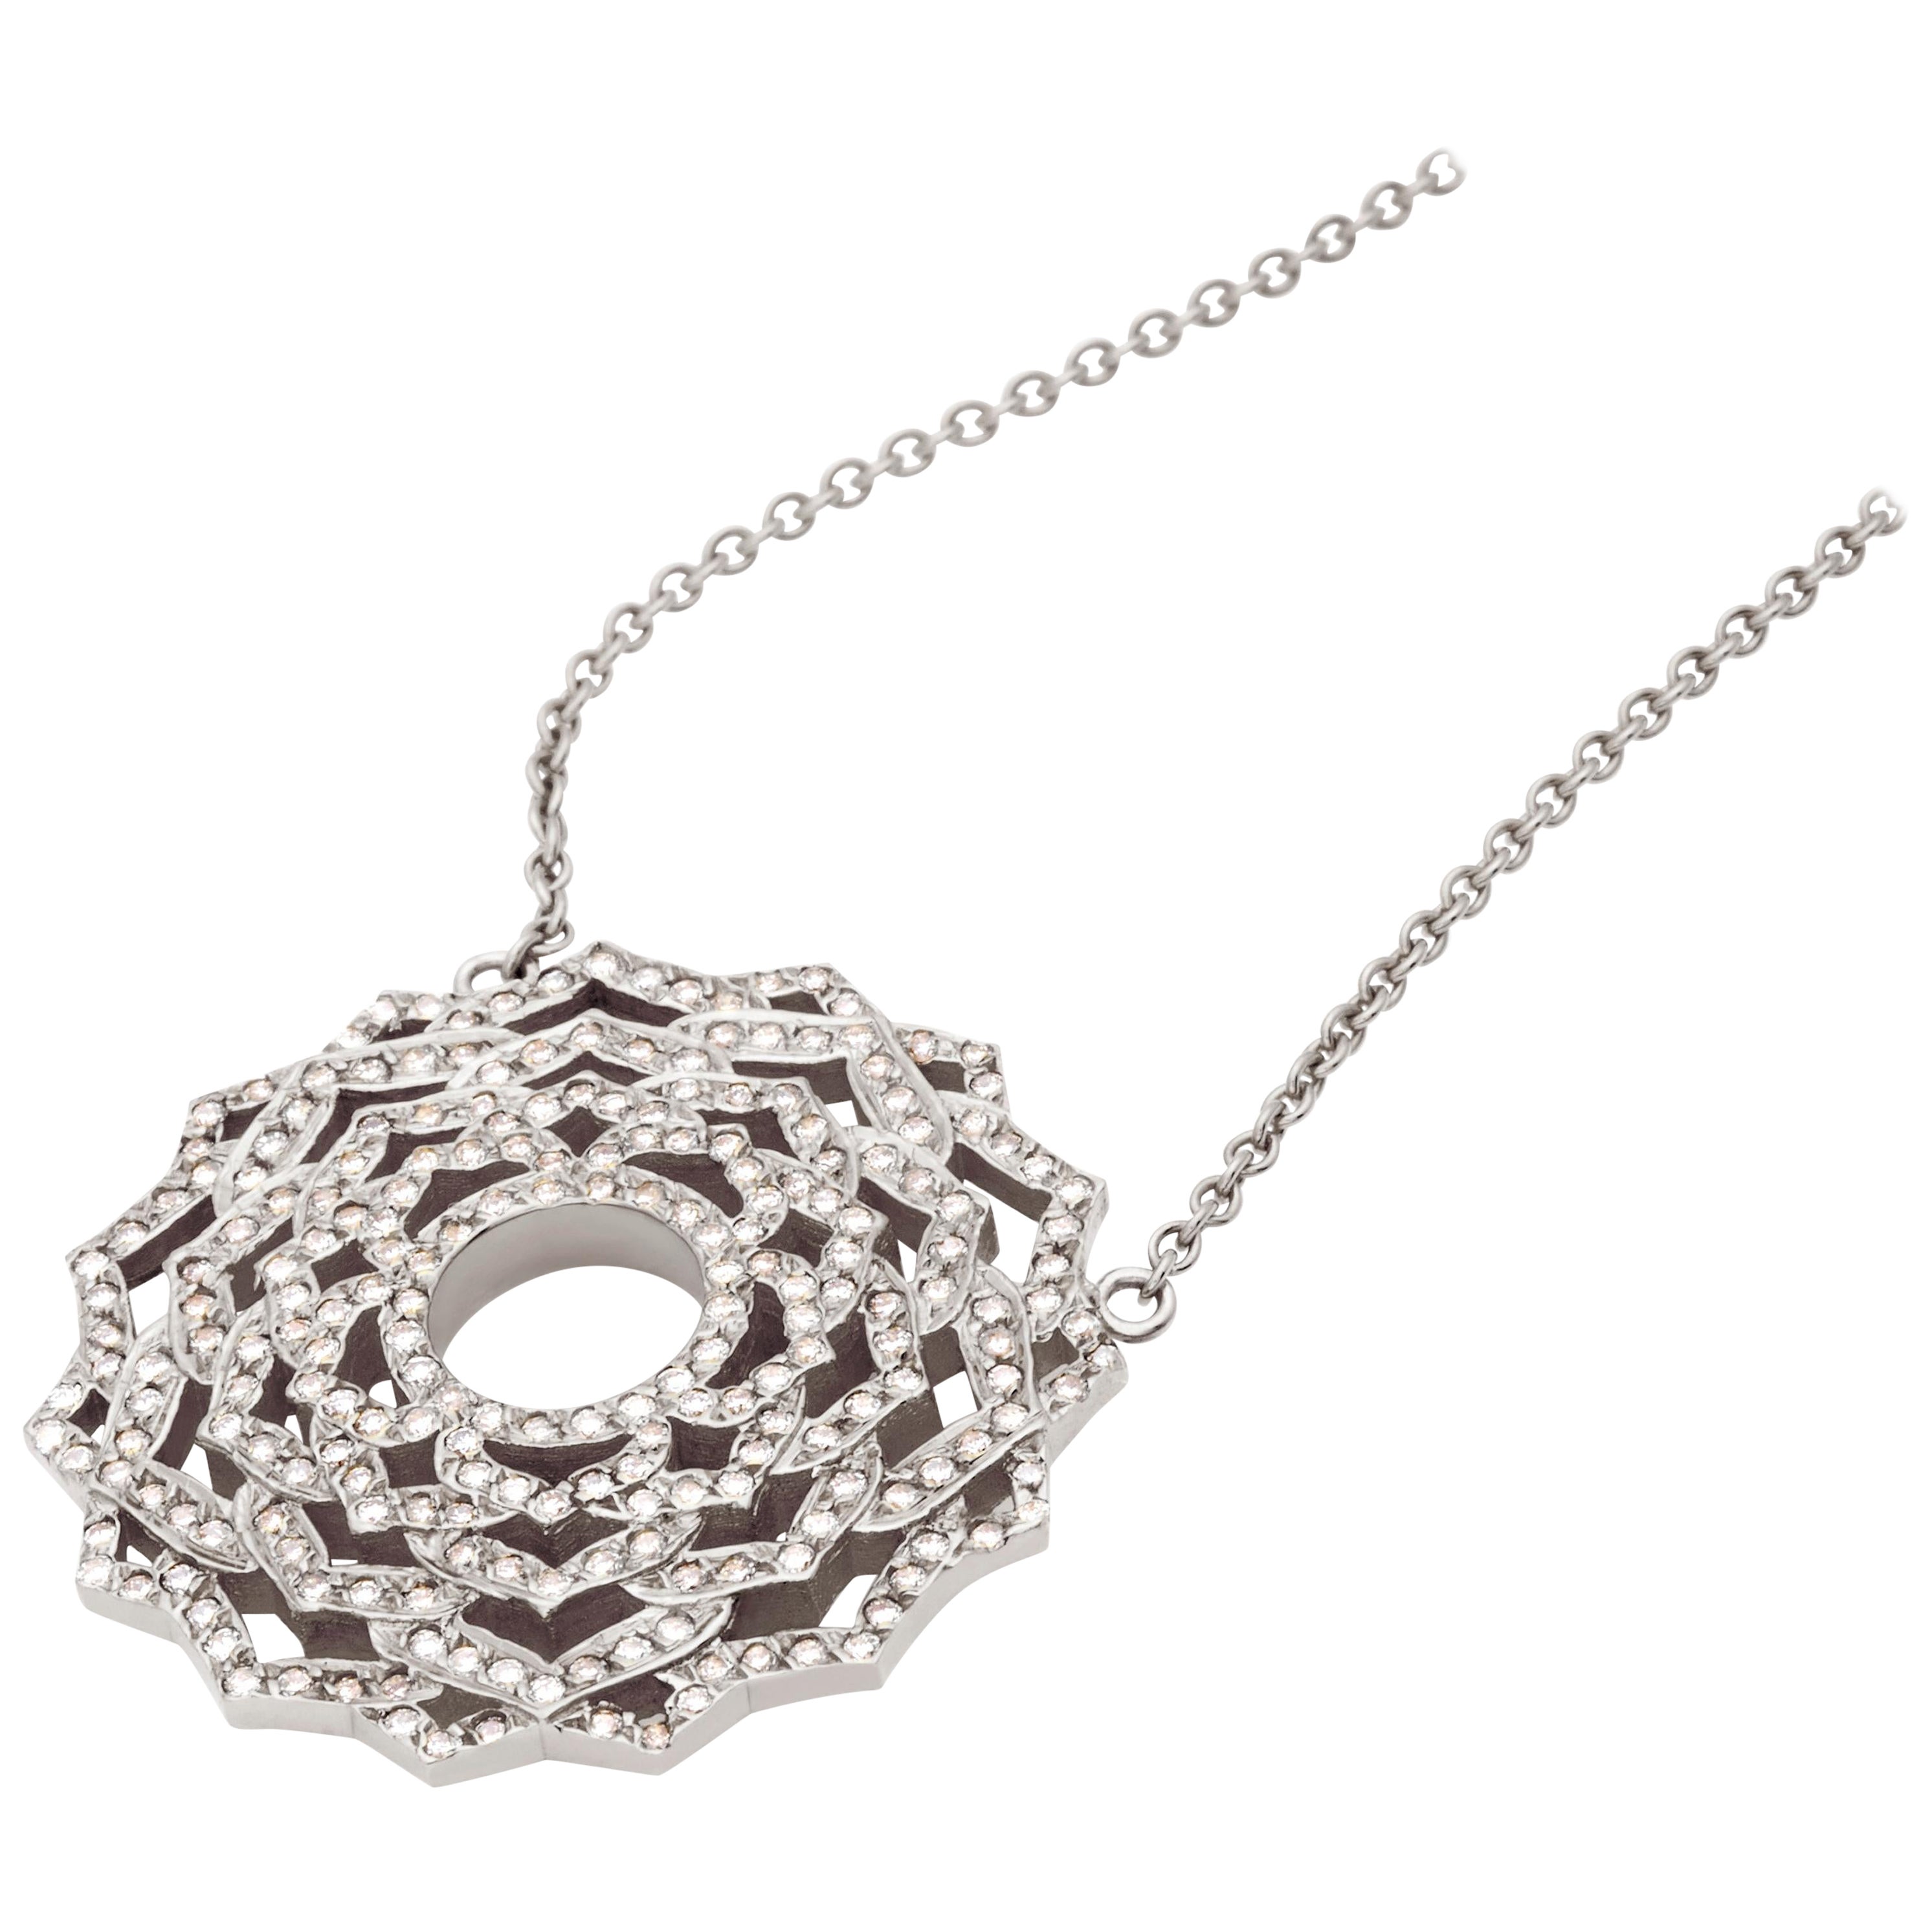 Sahasrara Crown Chakra Pendant Necklace in 18Kt White Gold with Diamonds For Sale